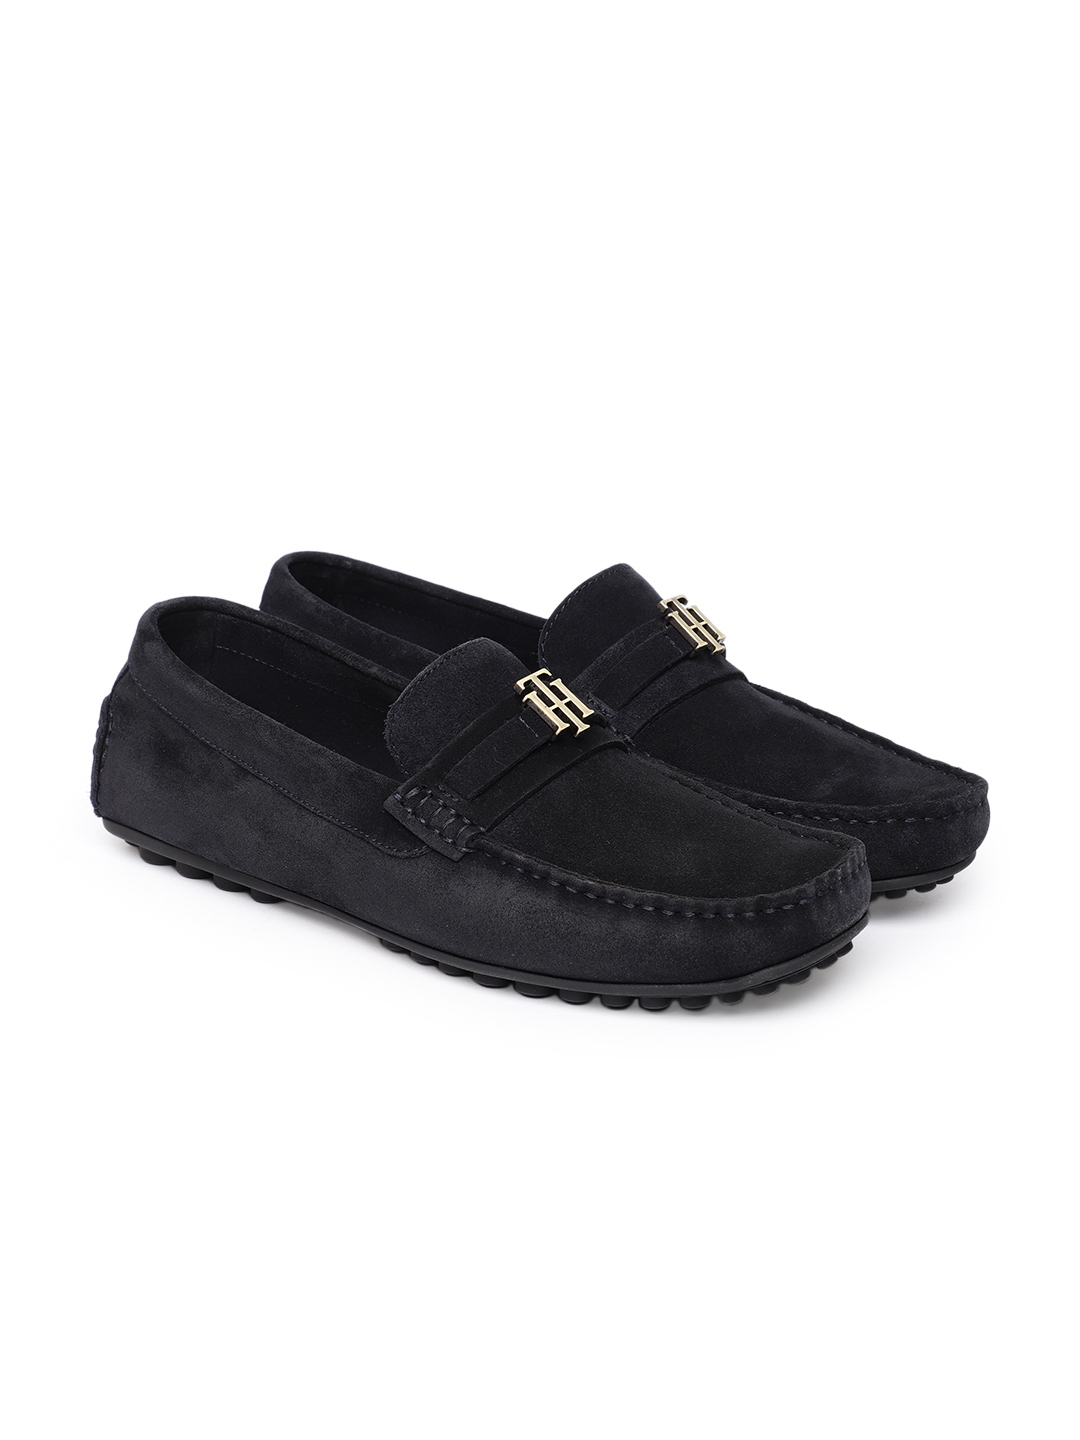 Buy Tommy Hilfiger Men Black Suede Loafers - Casual Shoes for 8692777 | Myntra